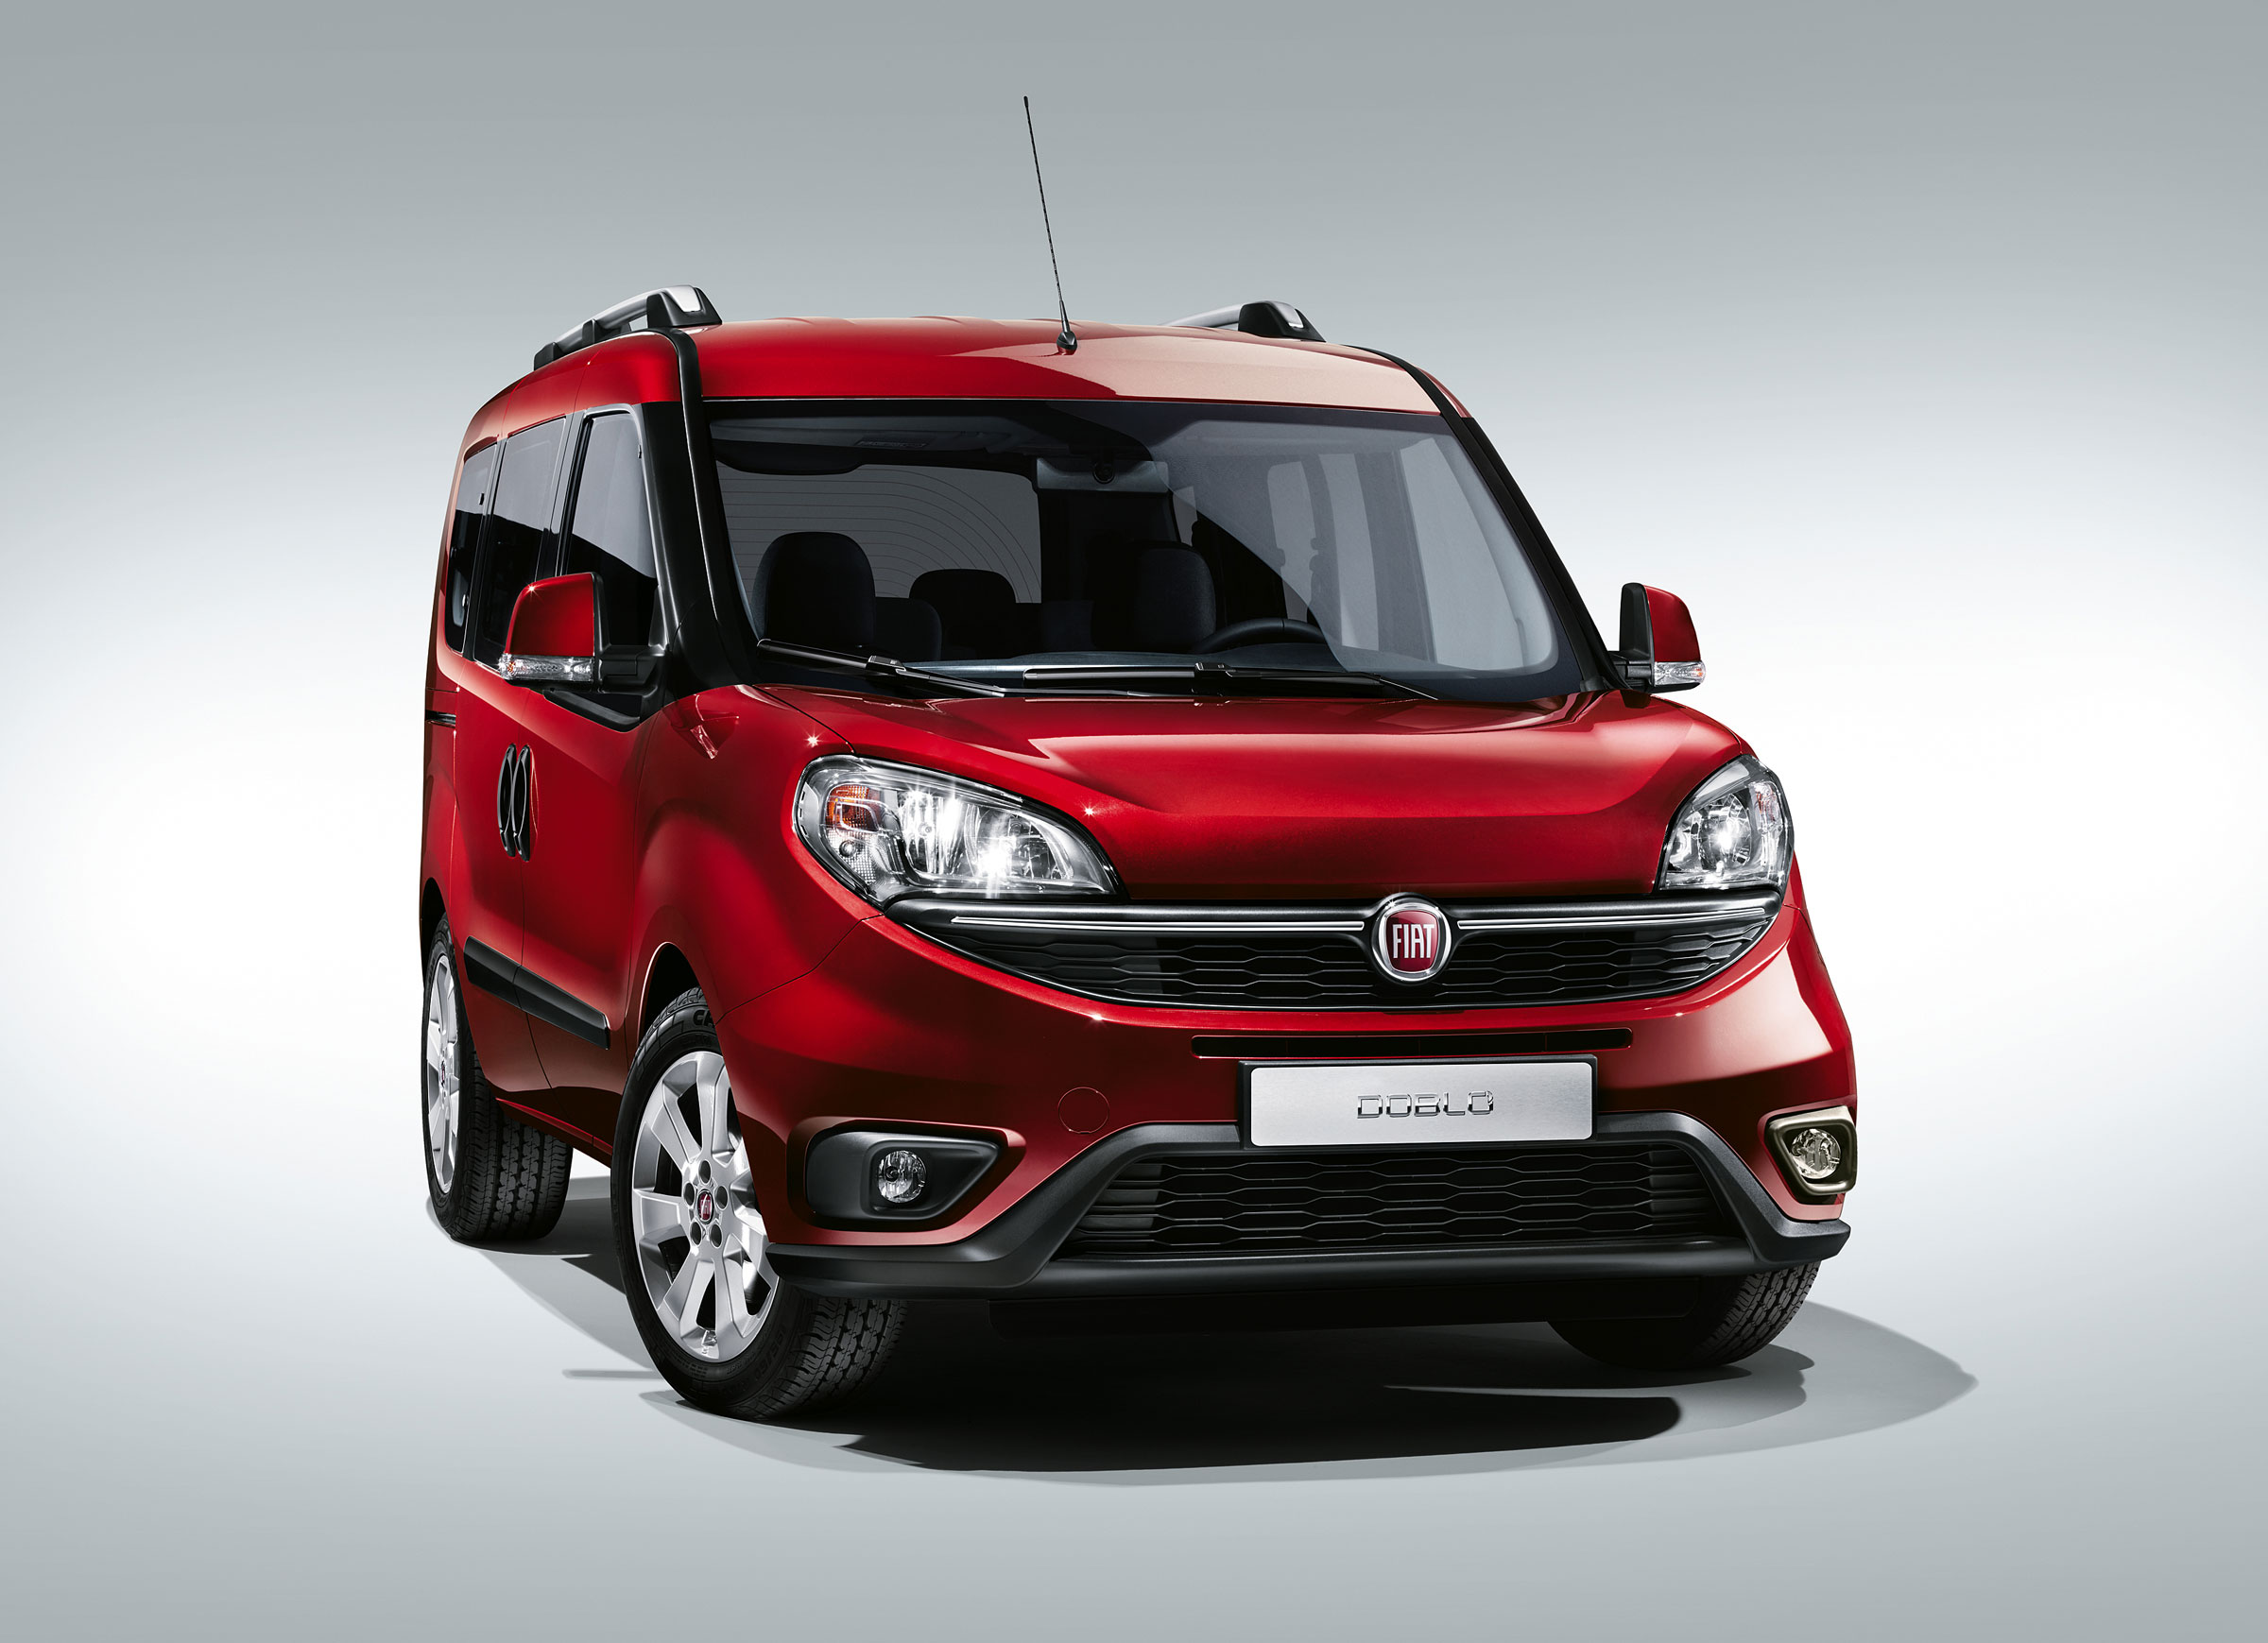 Fiat Doblo Ii Restyling 15 Now Compact Mpv Outstanding Cars